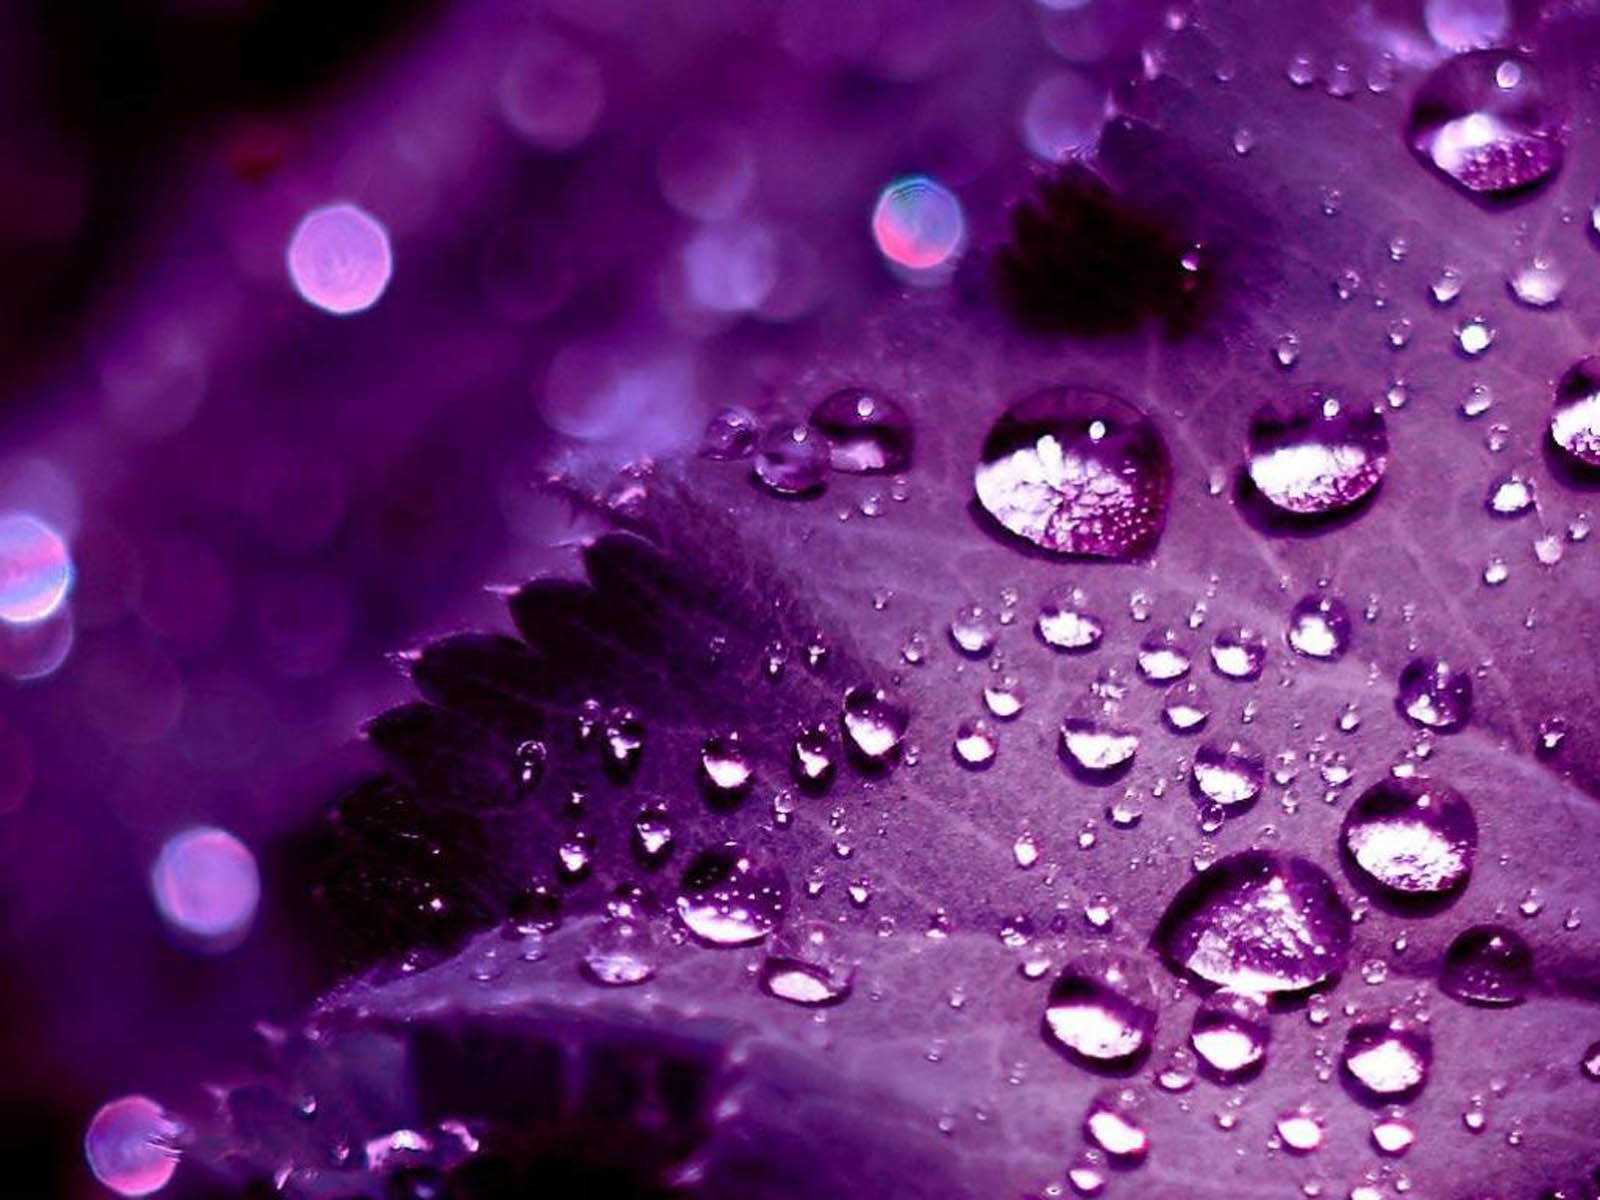 Hd Purple Wallpaper Image To Use As Background-9 - Cute Purple Backgrounds - HD Wallpaper 